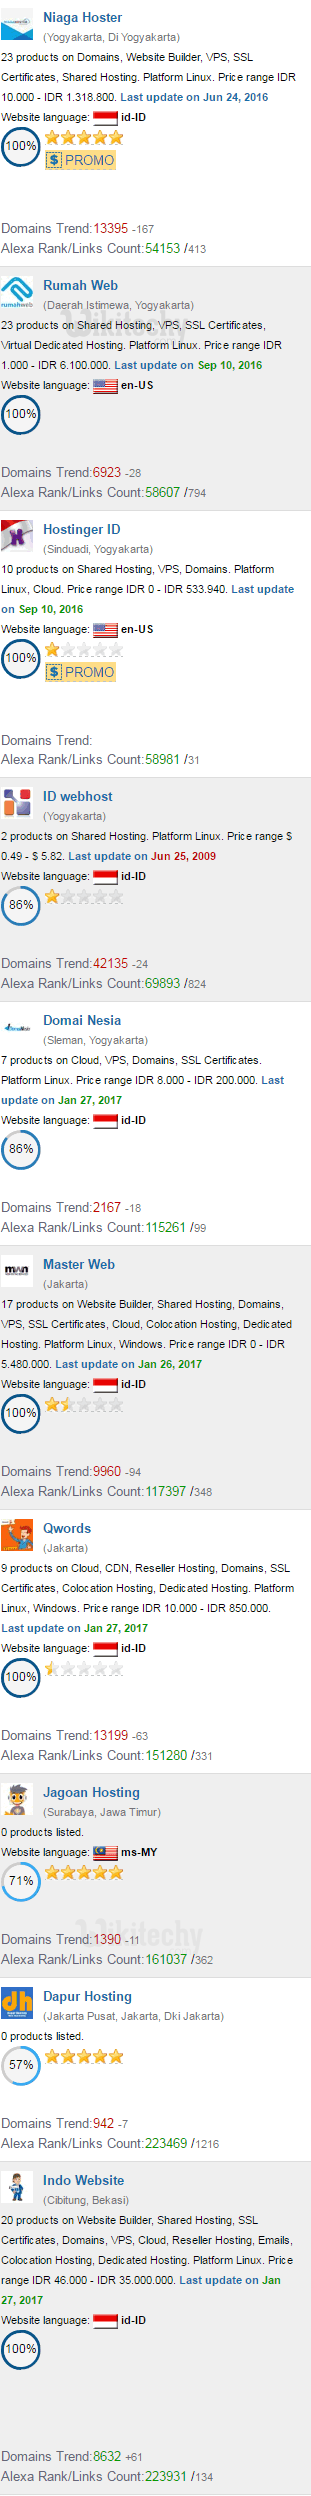 Hosting Indonesia Web Hosting Indonesia Top 10 Rank Best Cheap Images, Photos, Reviews